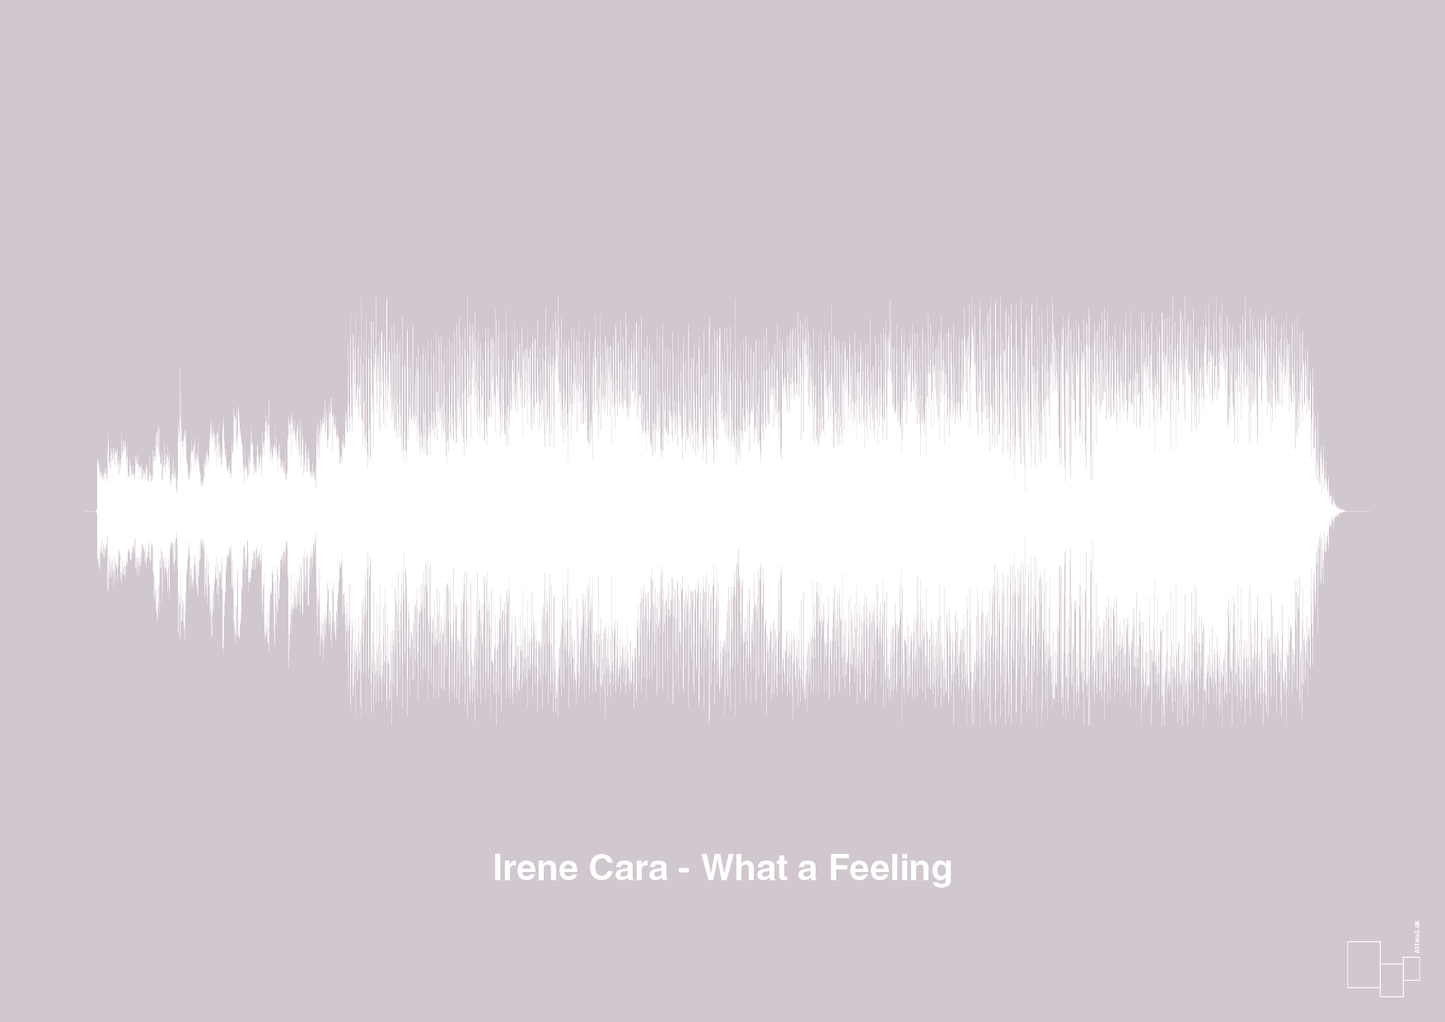 irene cara - what a feeling - Plakat med Musik i Dusty Lilac